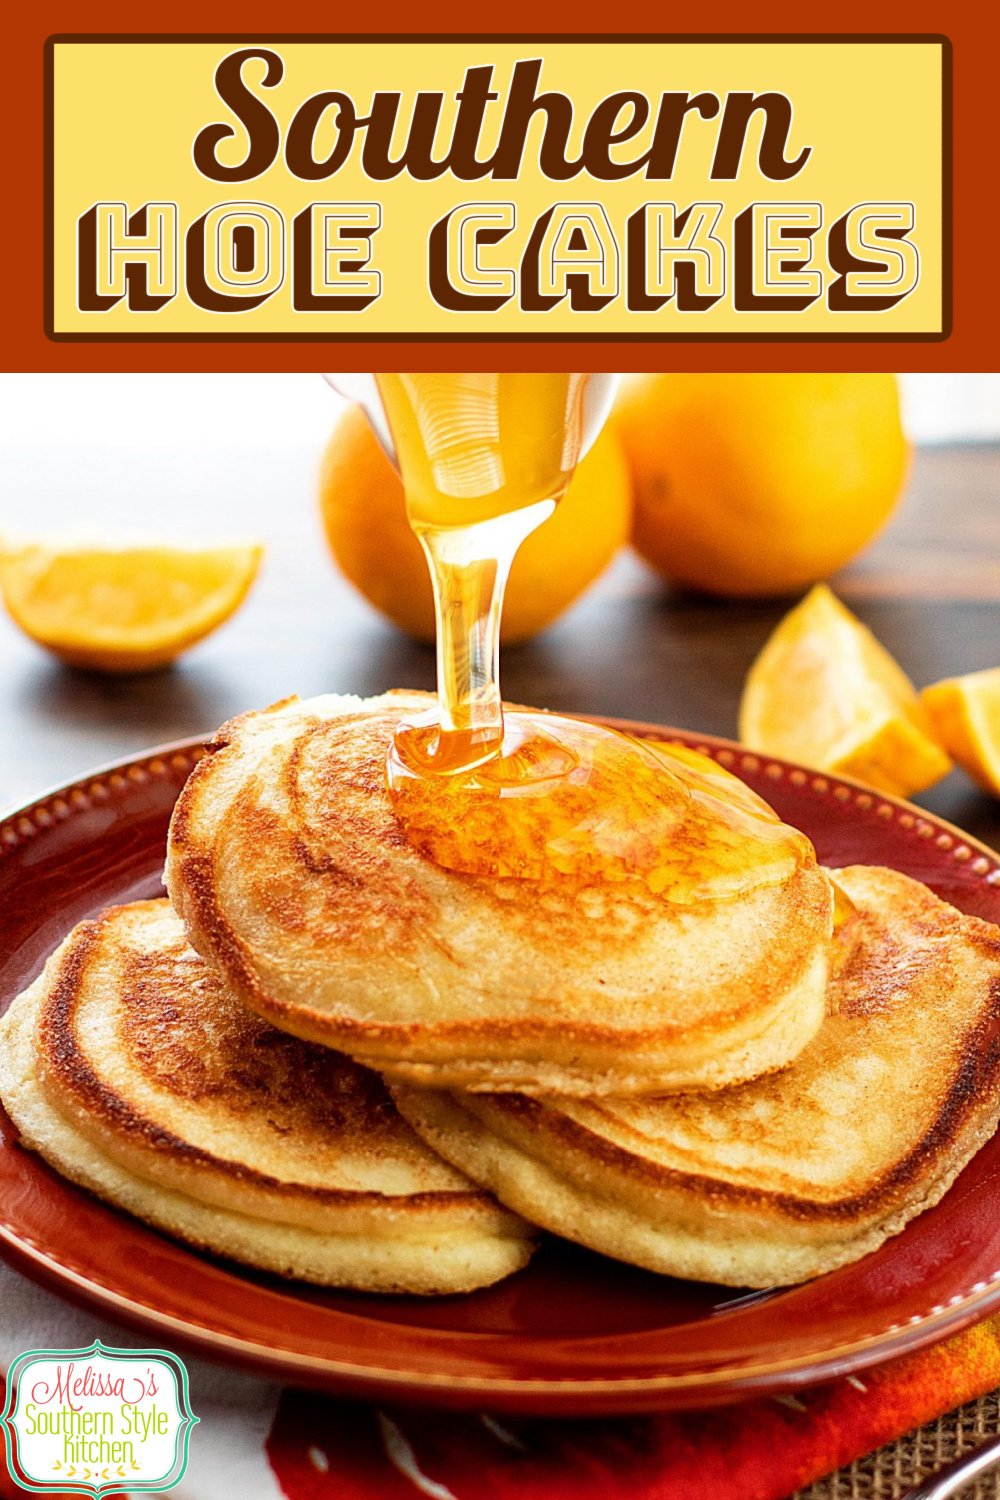 Serve these Southern Hoe Cake for breakfast or brunch with a drizzle of honey or maple syrup #southernhoecakes #hoecakes #johnnycakes #pancakes #hoecakesrecipes #breakfast #brunch #Southernfood #southernrecipes #holidaybrunch #cornbread via @melissasssk